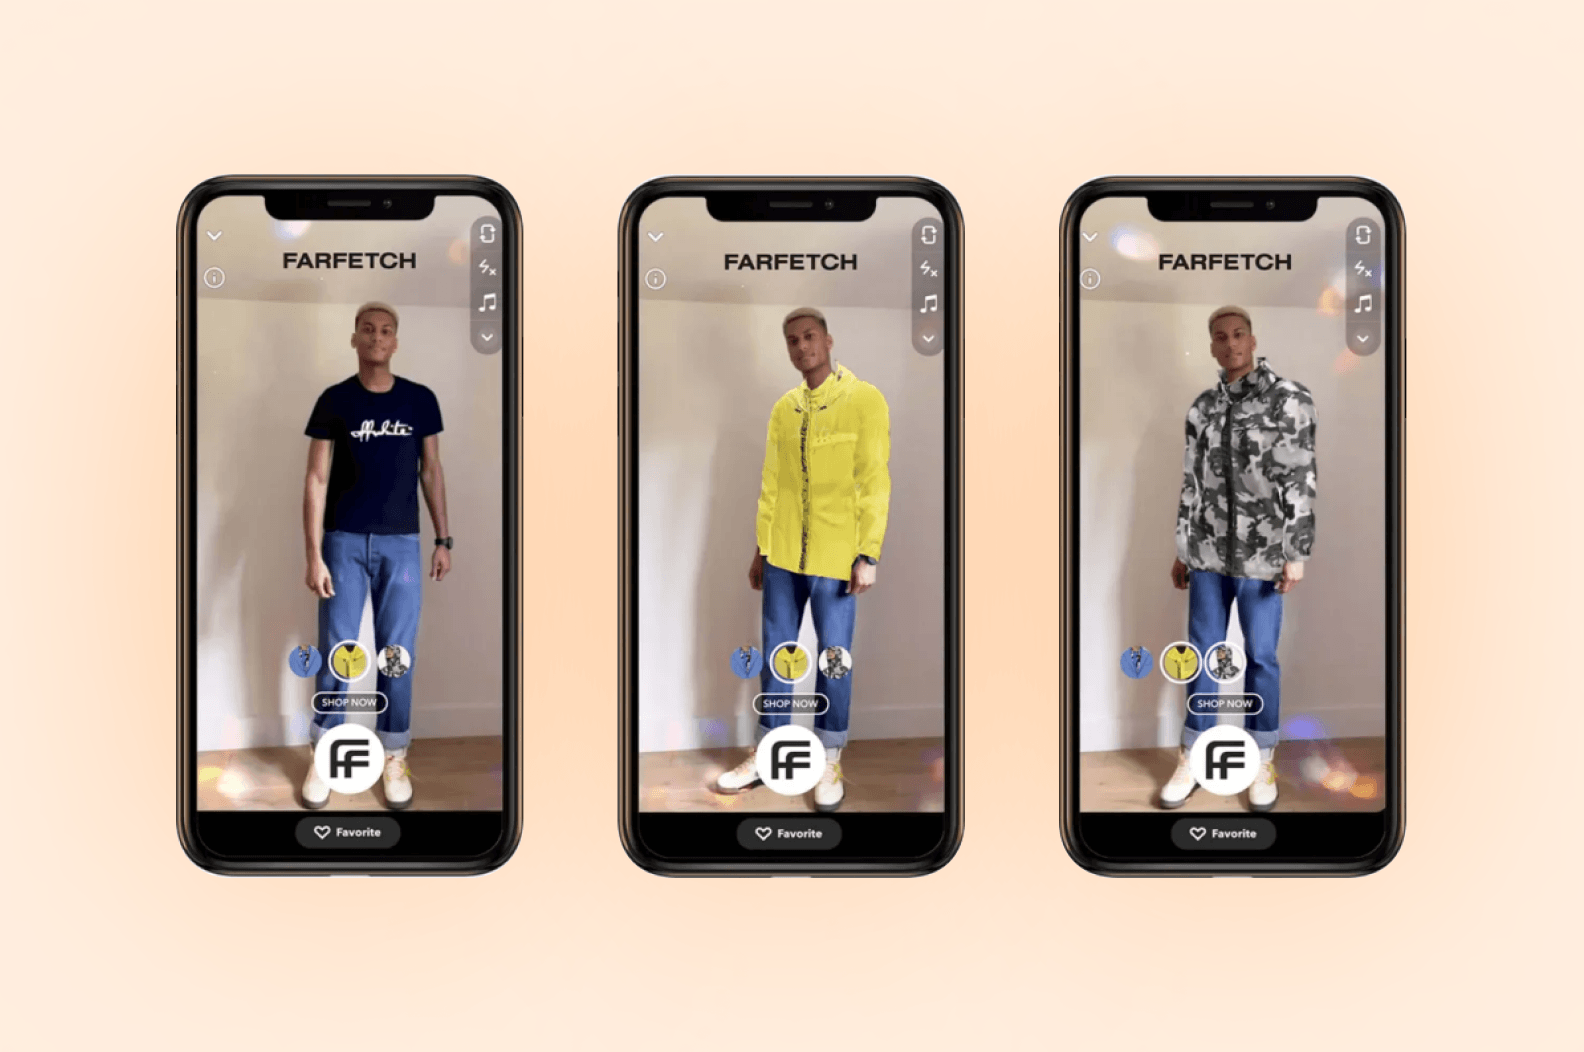 Farfetch app offers virtual try-on function